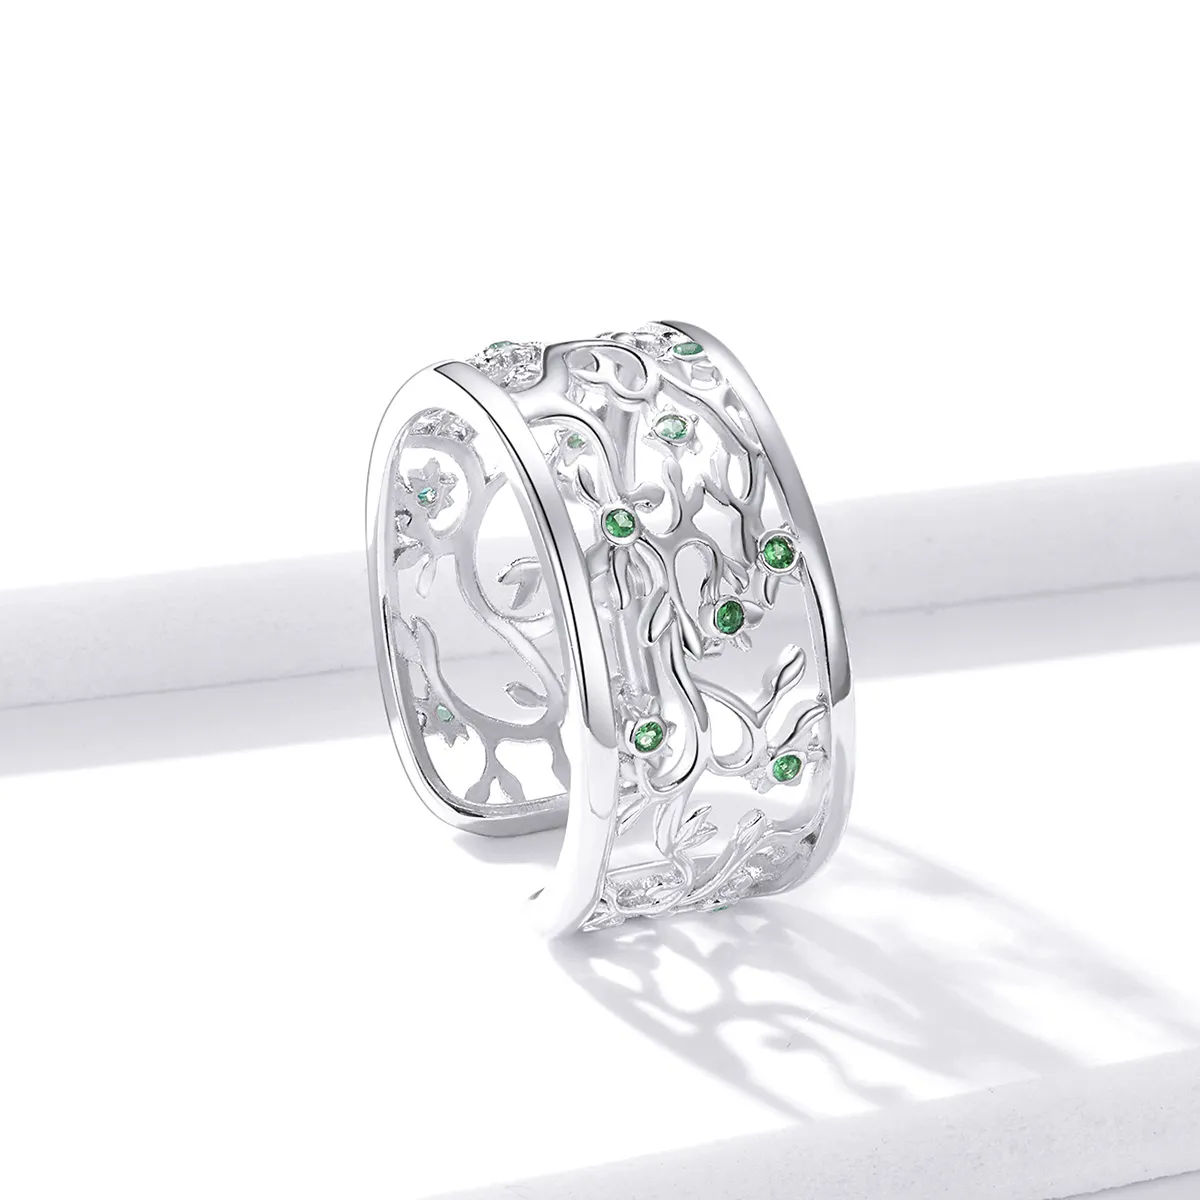 Pandora Style Silver Tree of Life Open Ring - BSR125